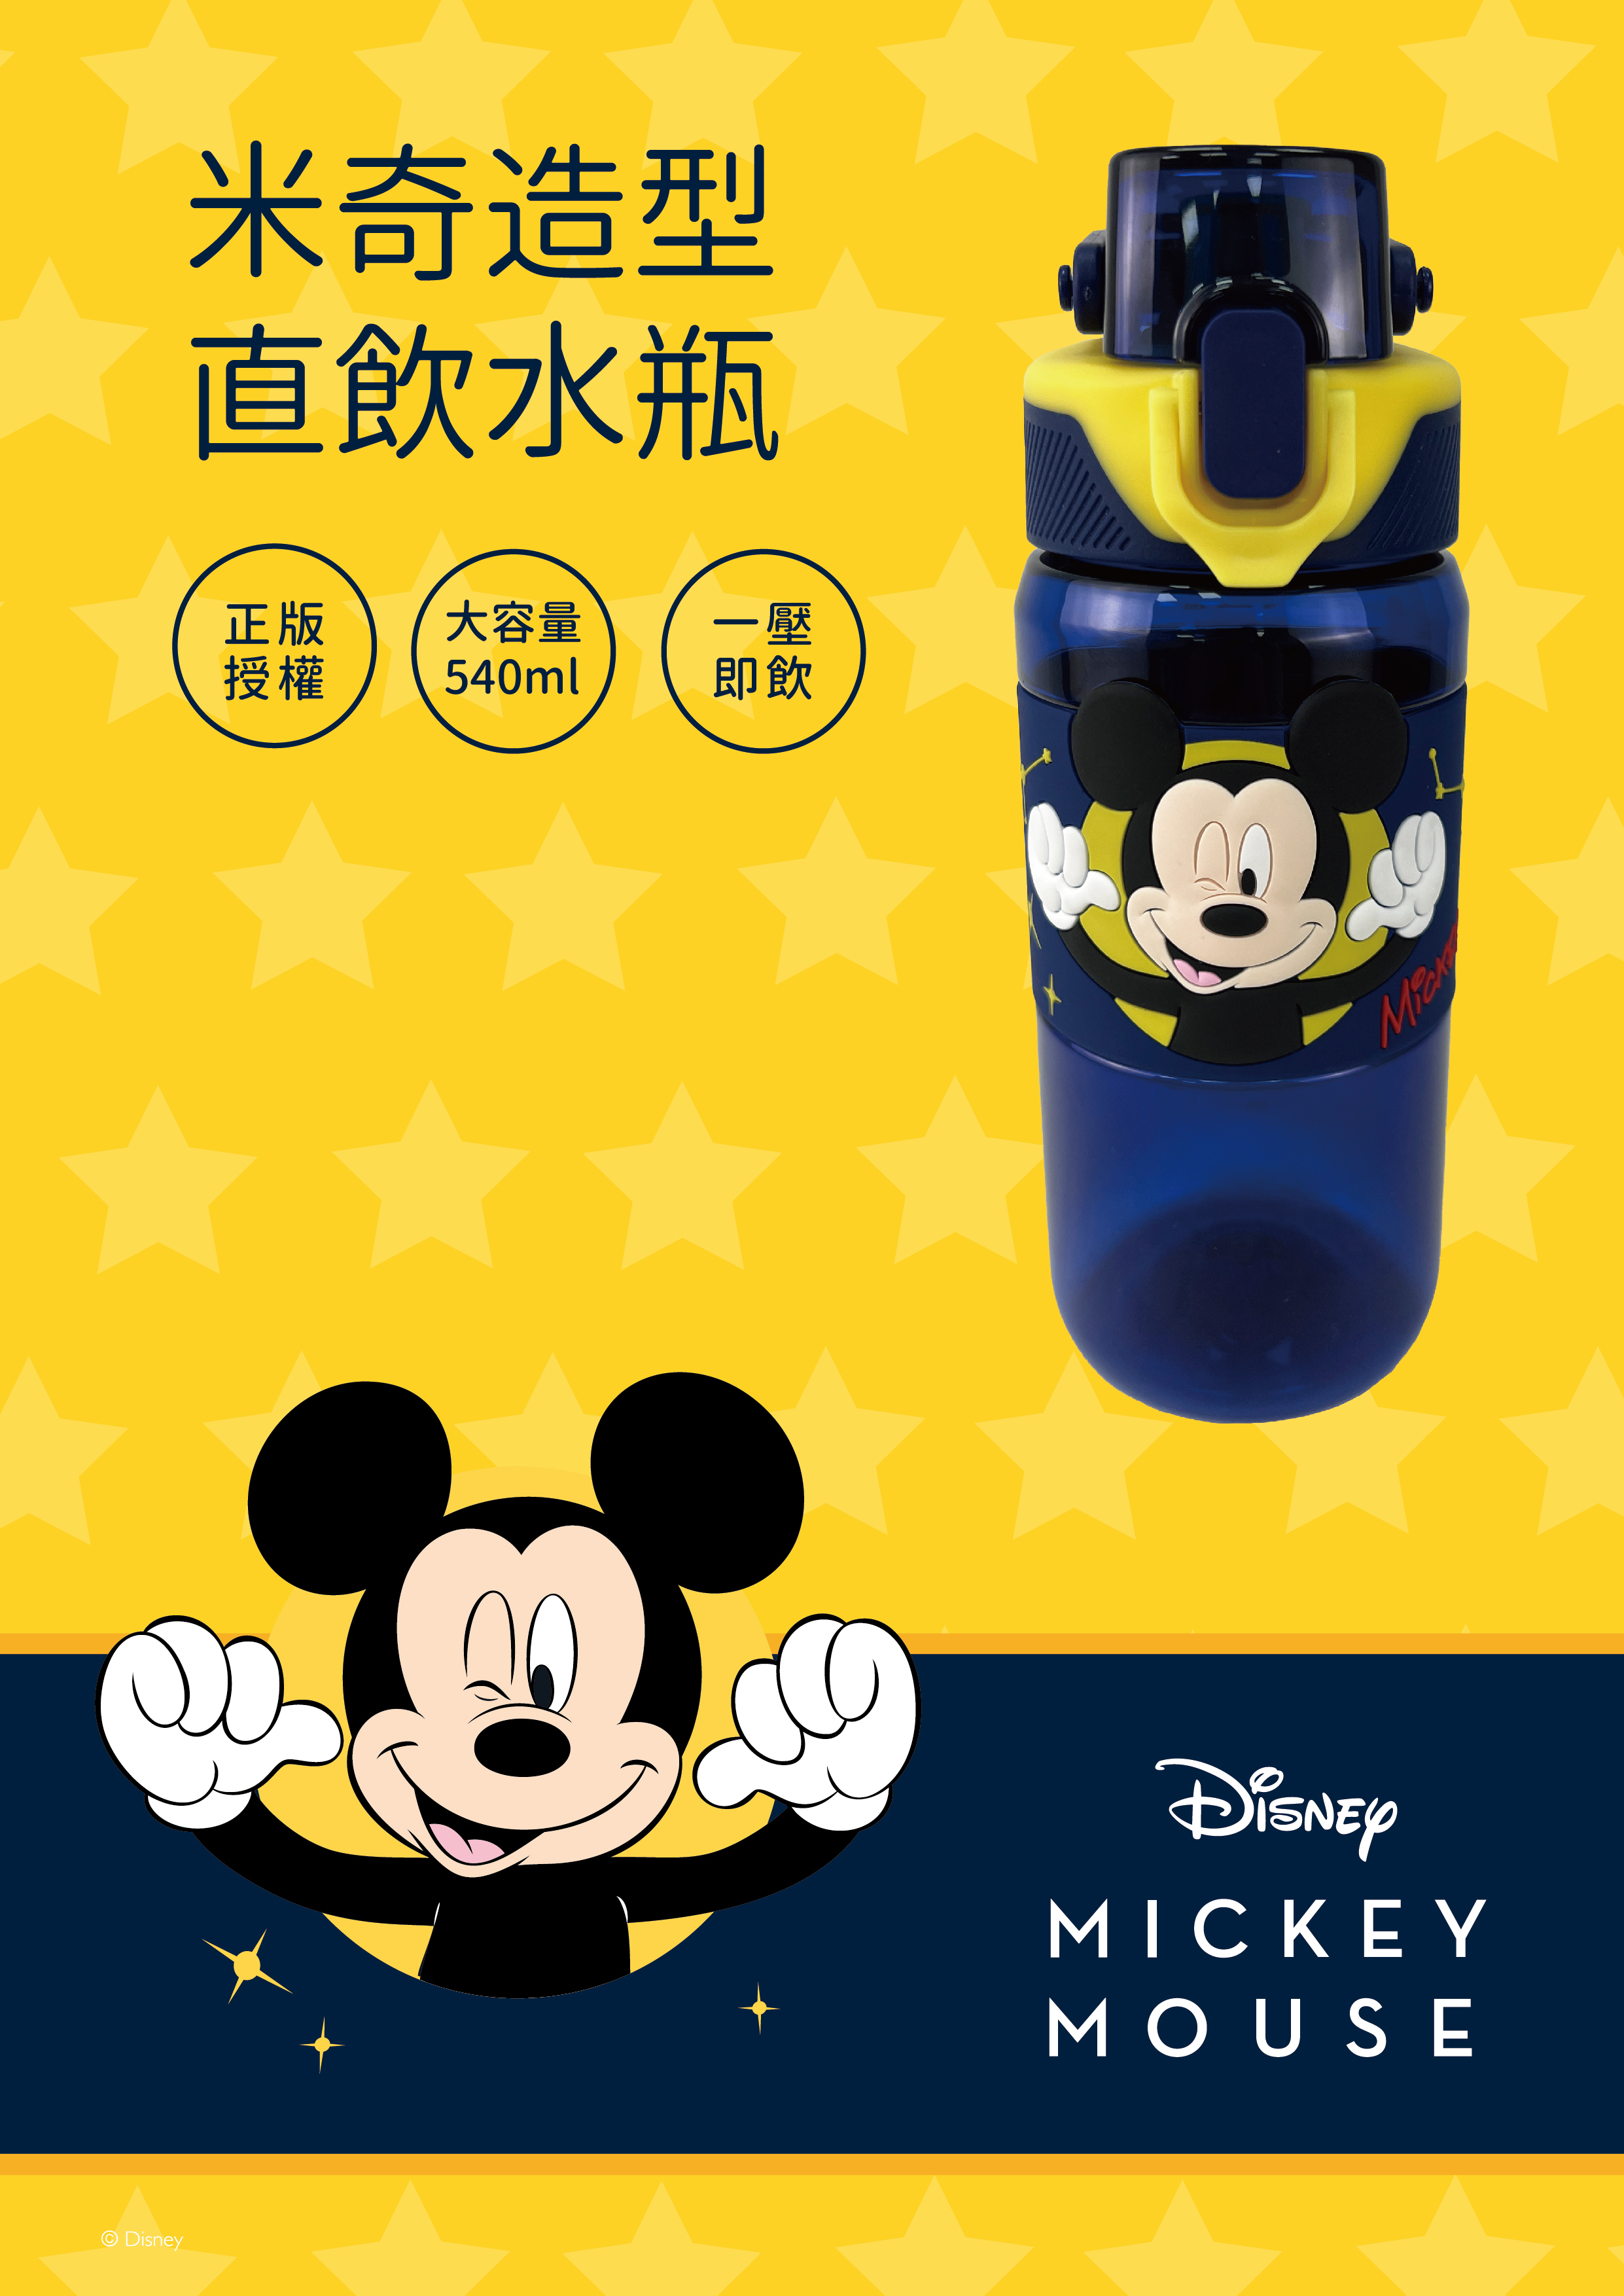 [Disney Water Bottle] Disney series of direct drinking water bottles - 3 types to choose from